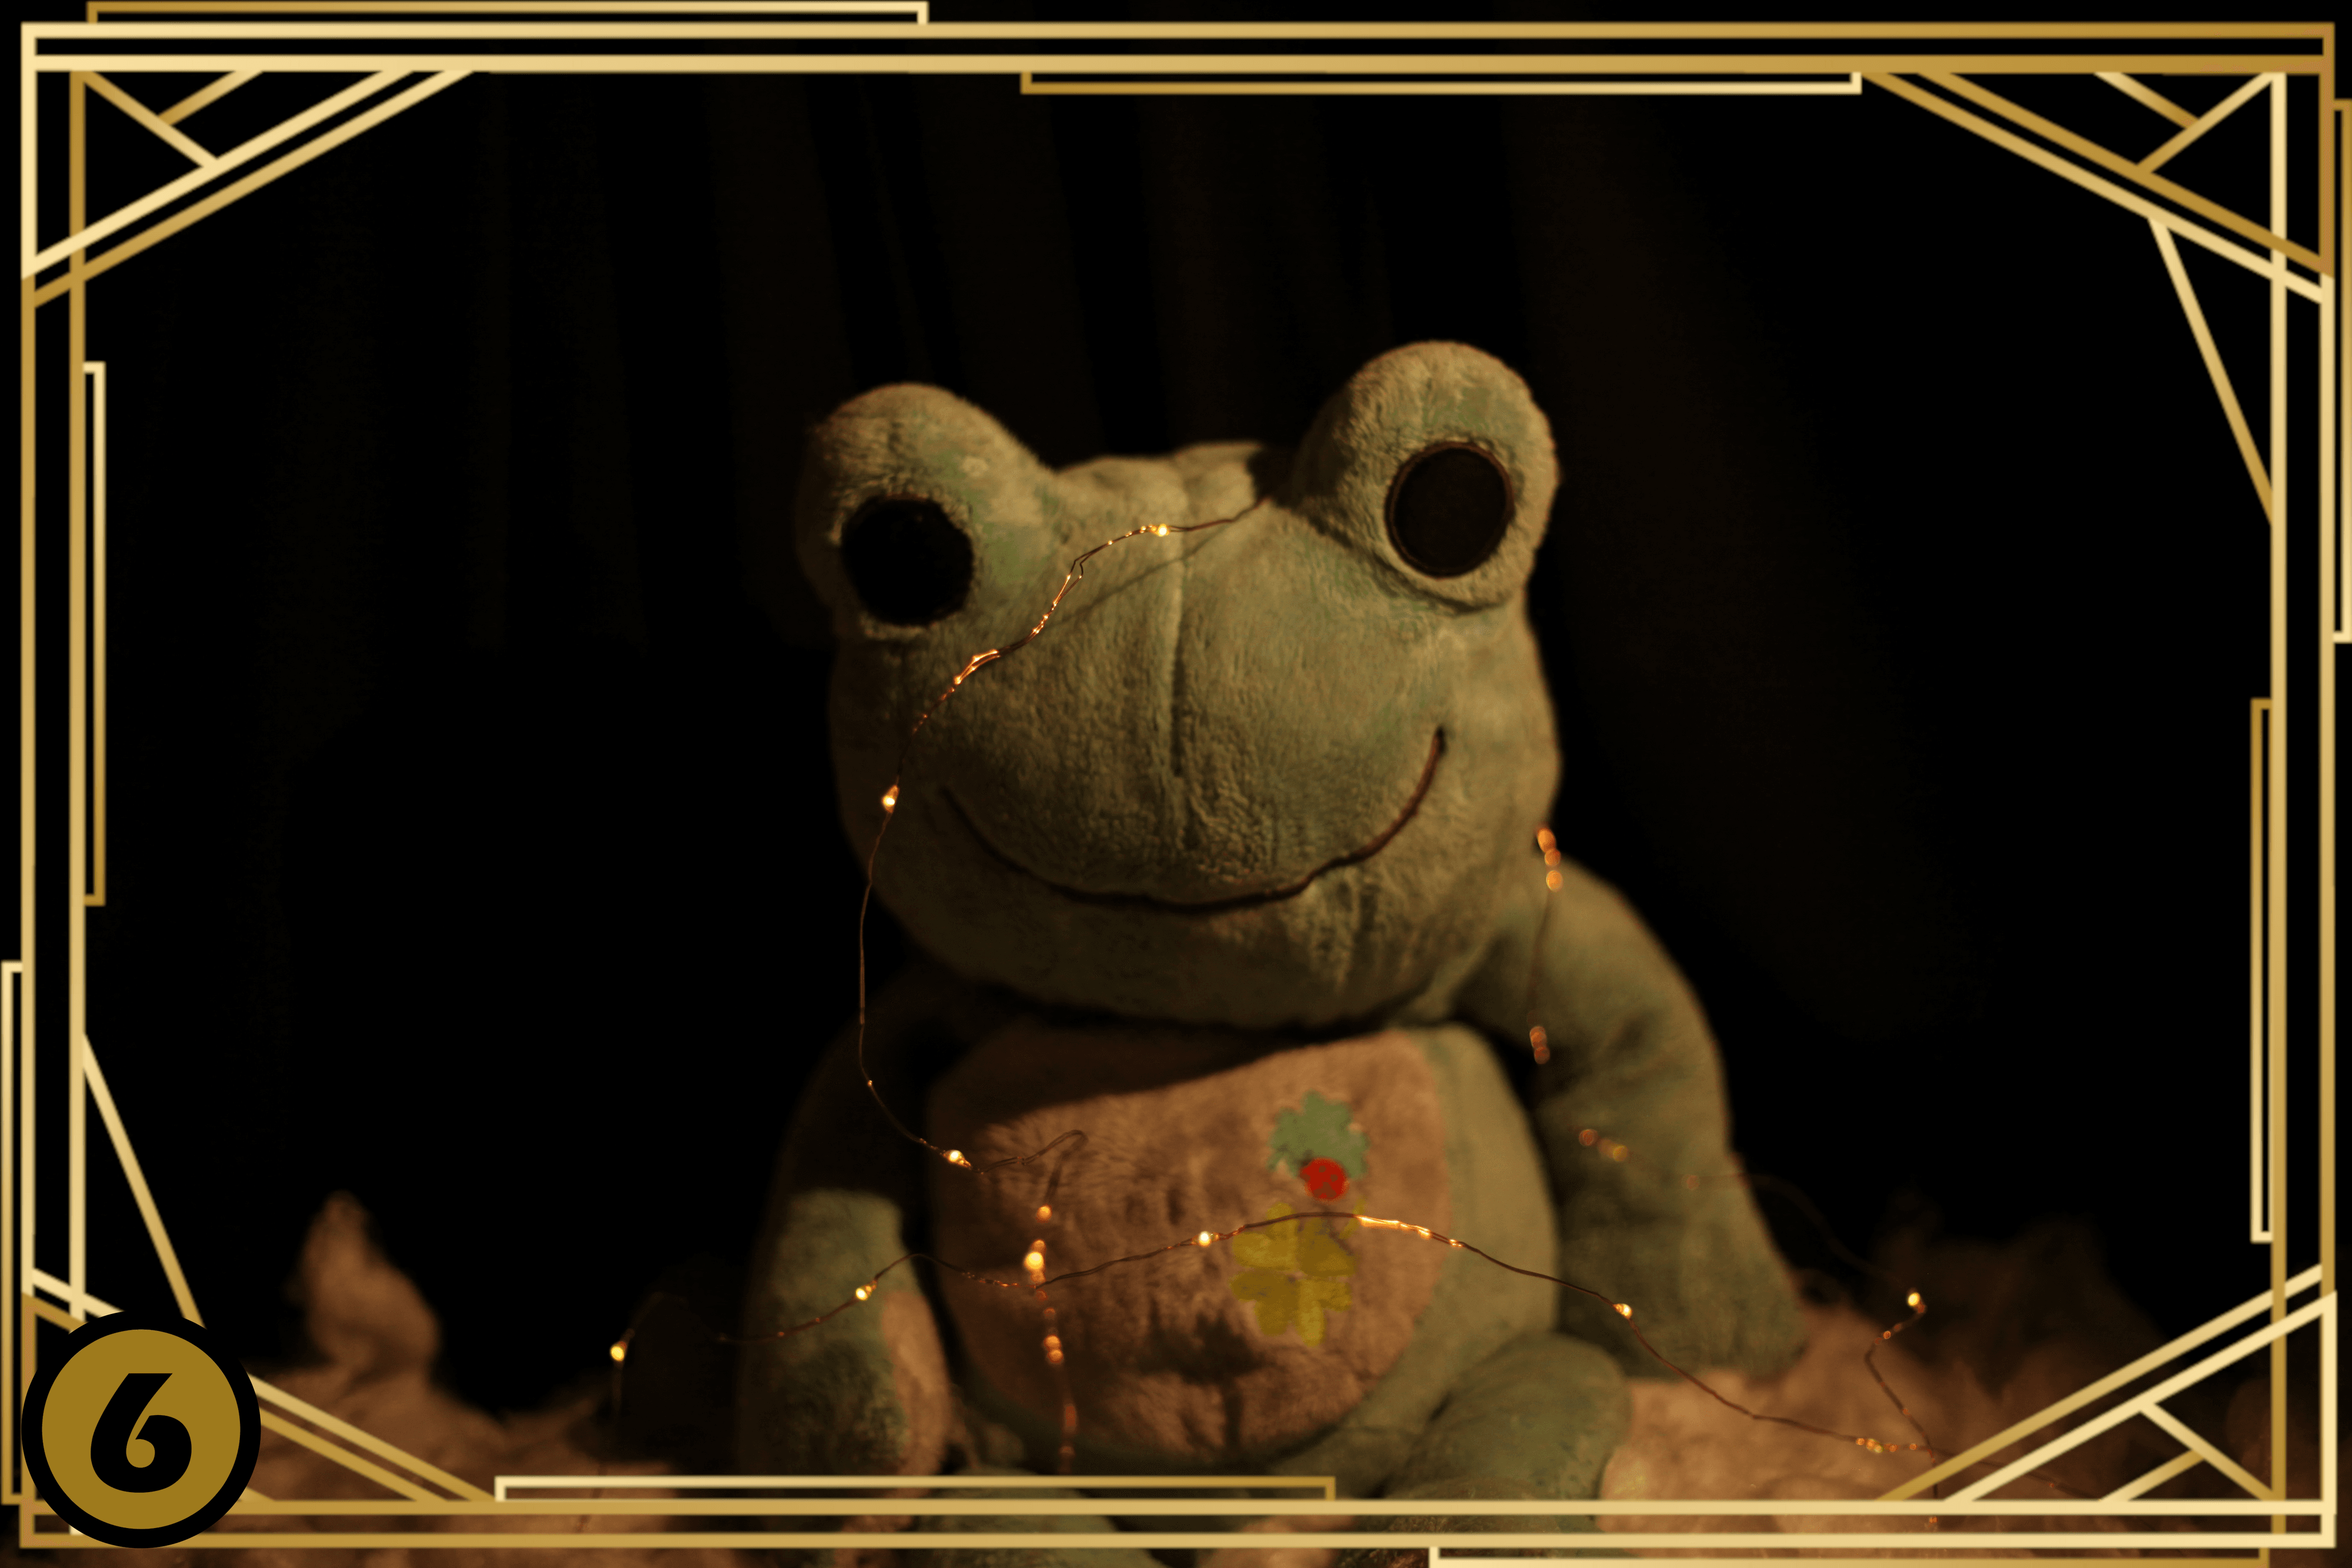 Pickles the Frog - s01c06